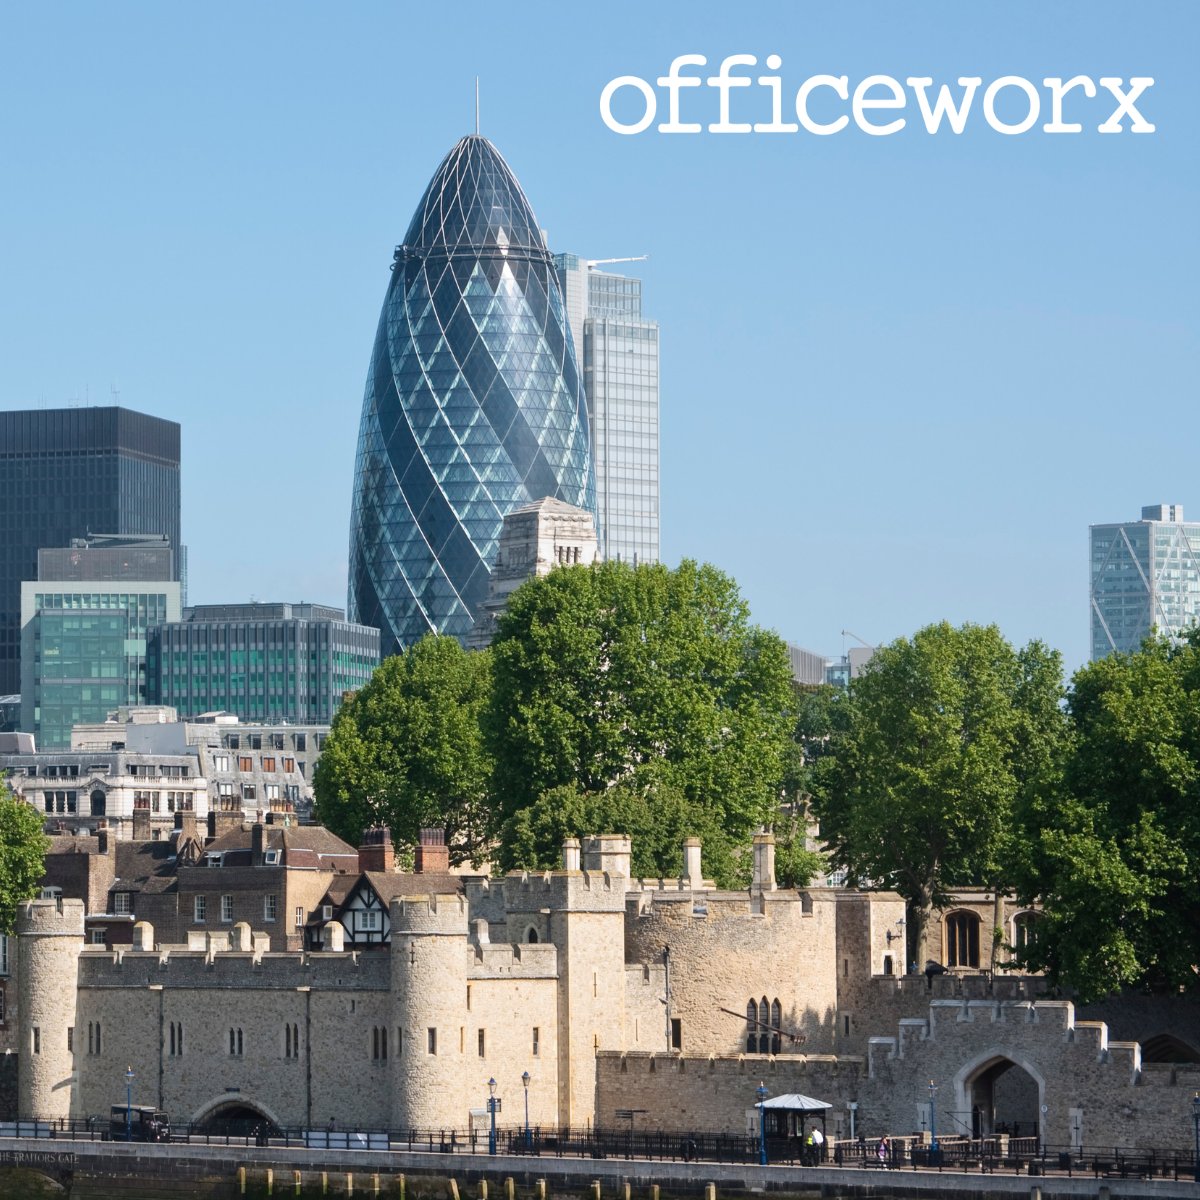 It is a busy day at @officeworx HQ as we prepare for an exciting project this weekend in London. 

We are working at a popular landmark in the city, and we can't wait to see the project come together. #Gherkin 

#GlosBiz